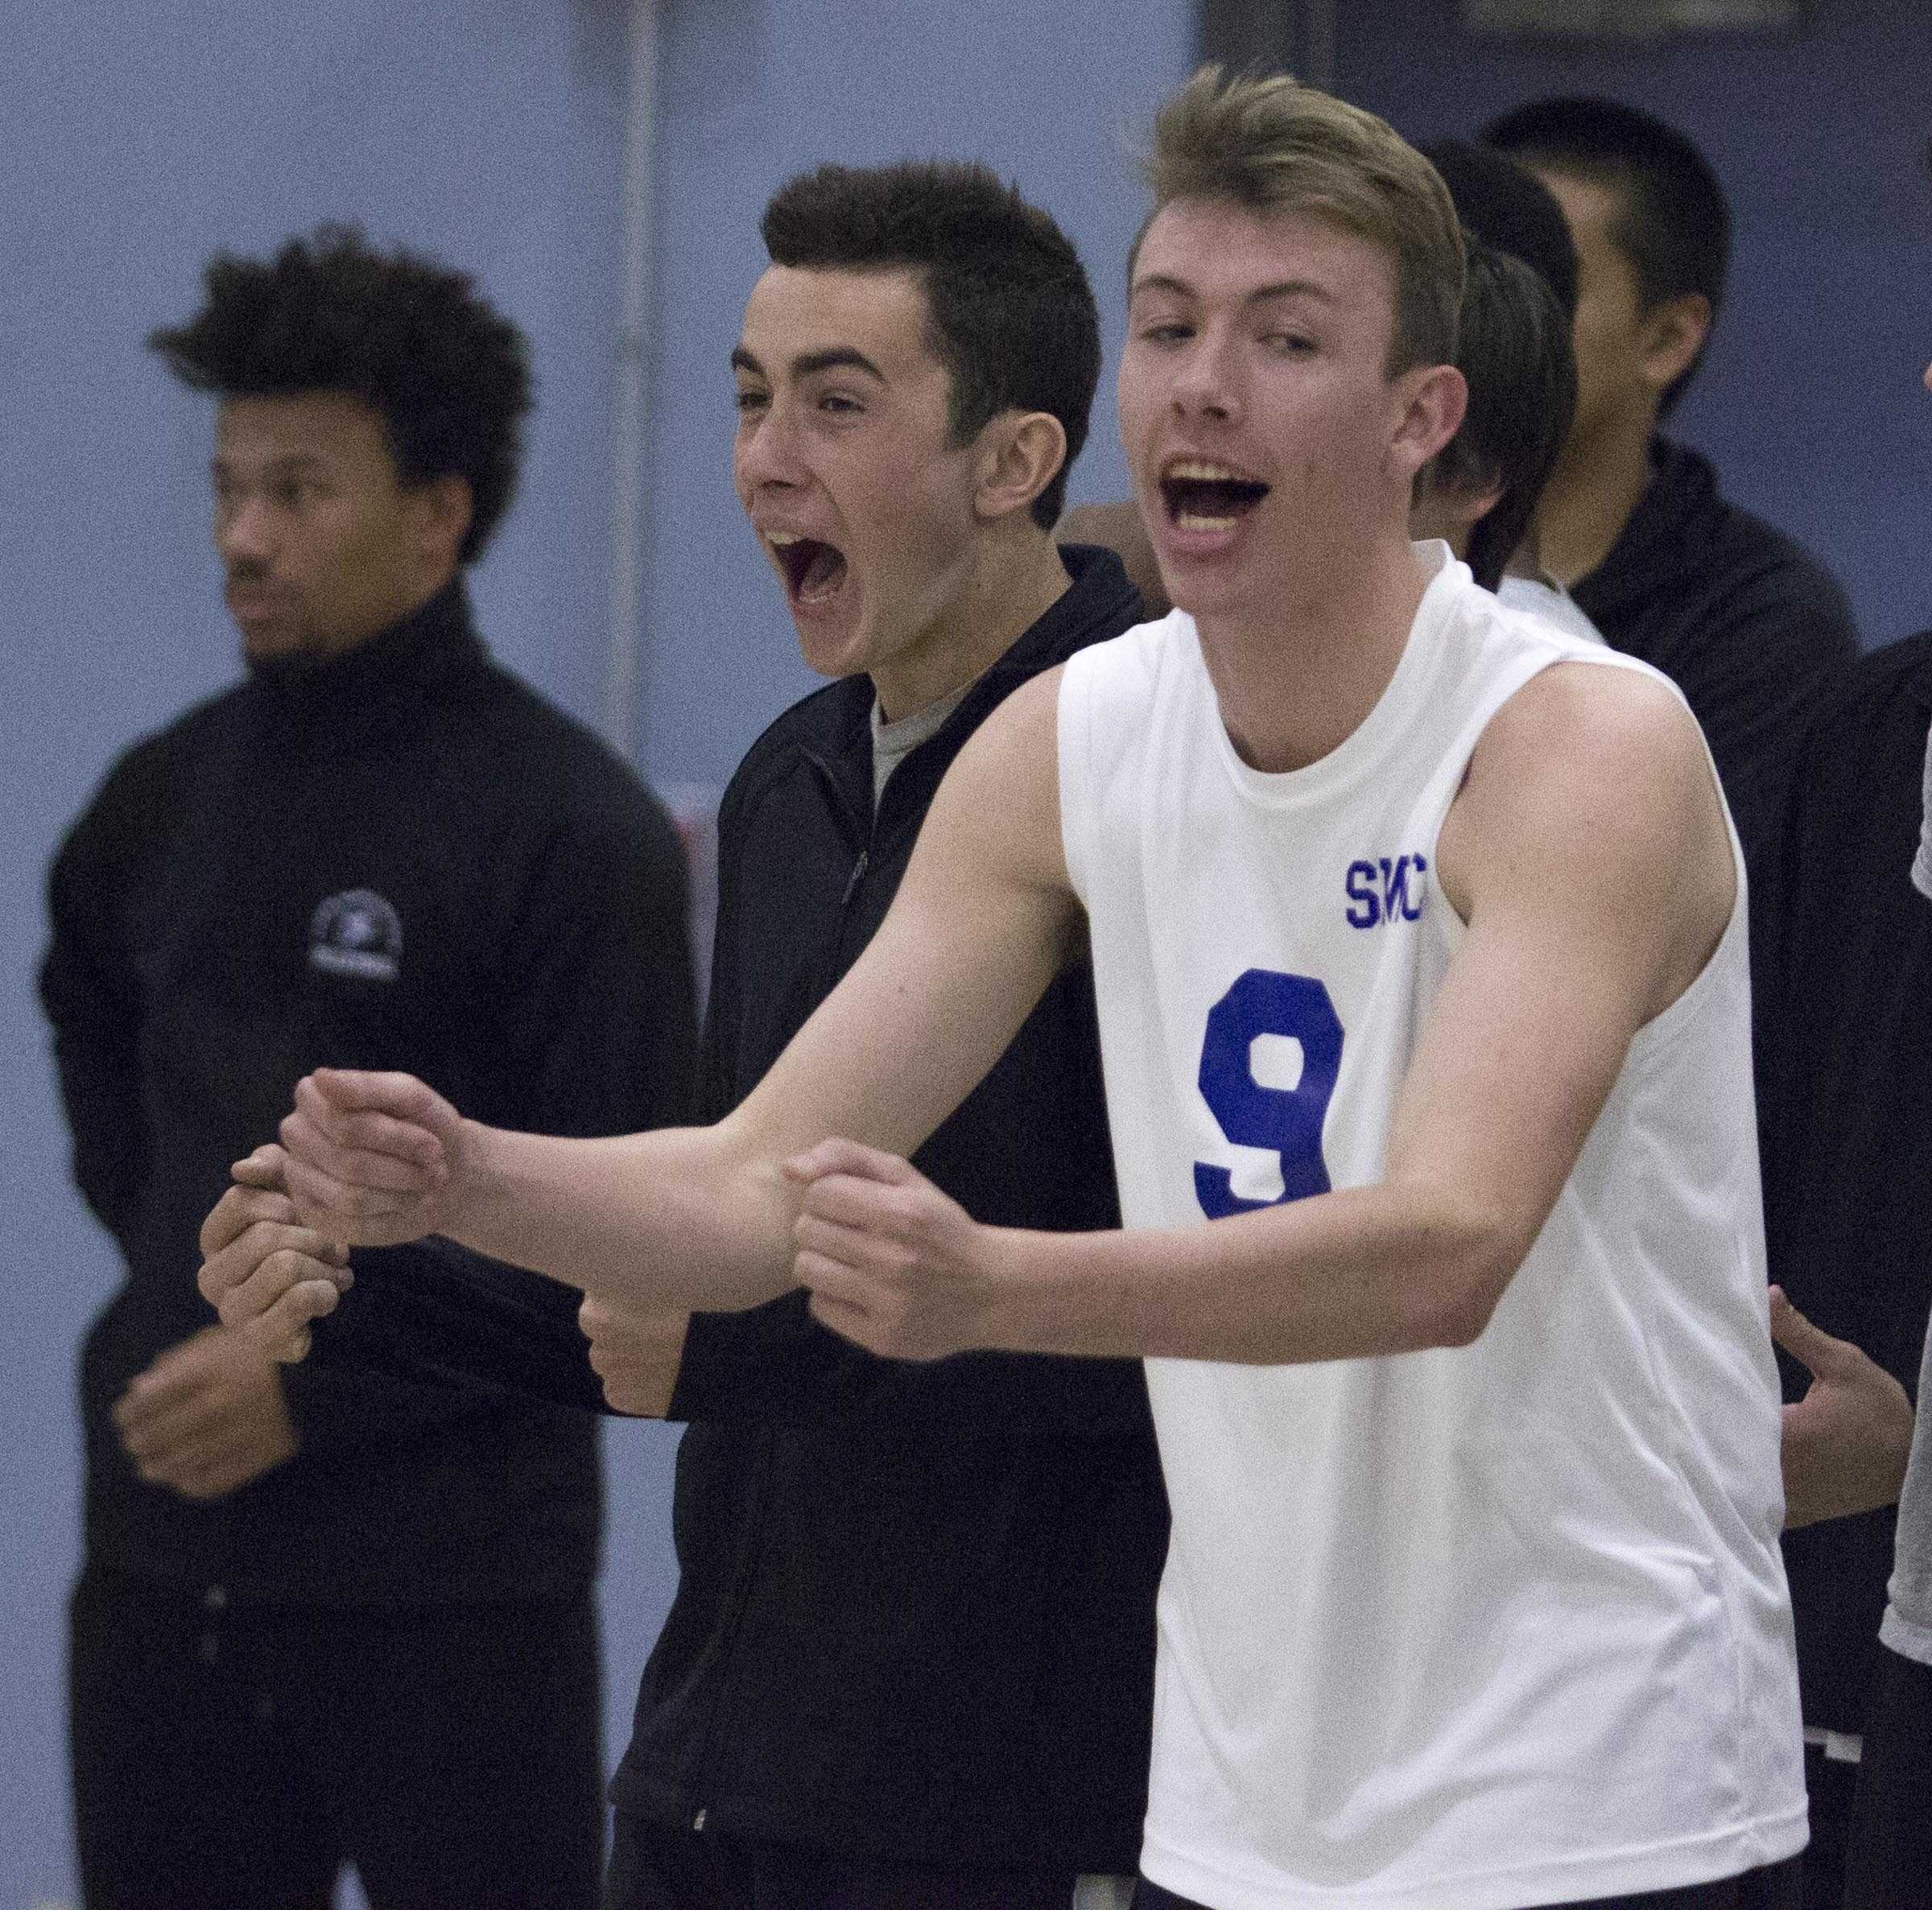  Santa Monica College Corsairs sophomore left blocker Bradley McCallister (9) celebrates his team’s first set clinching point with his team mates in the SMC Gymnasium at Santa Monica College in Santa Monica, CA. on wednesday, March 1, 2017. On the wa